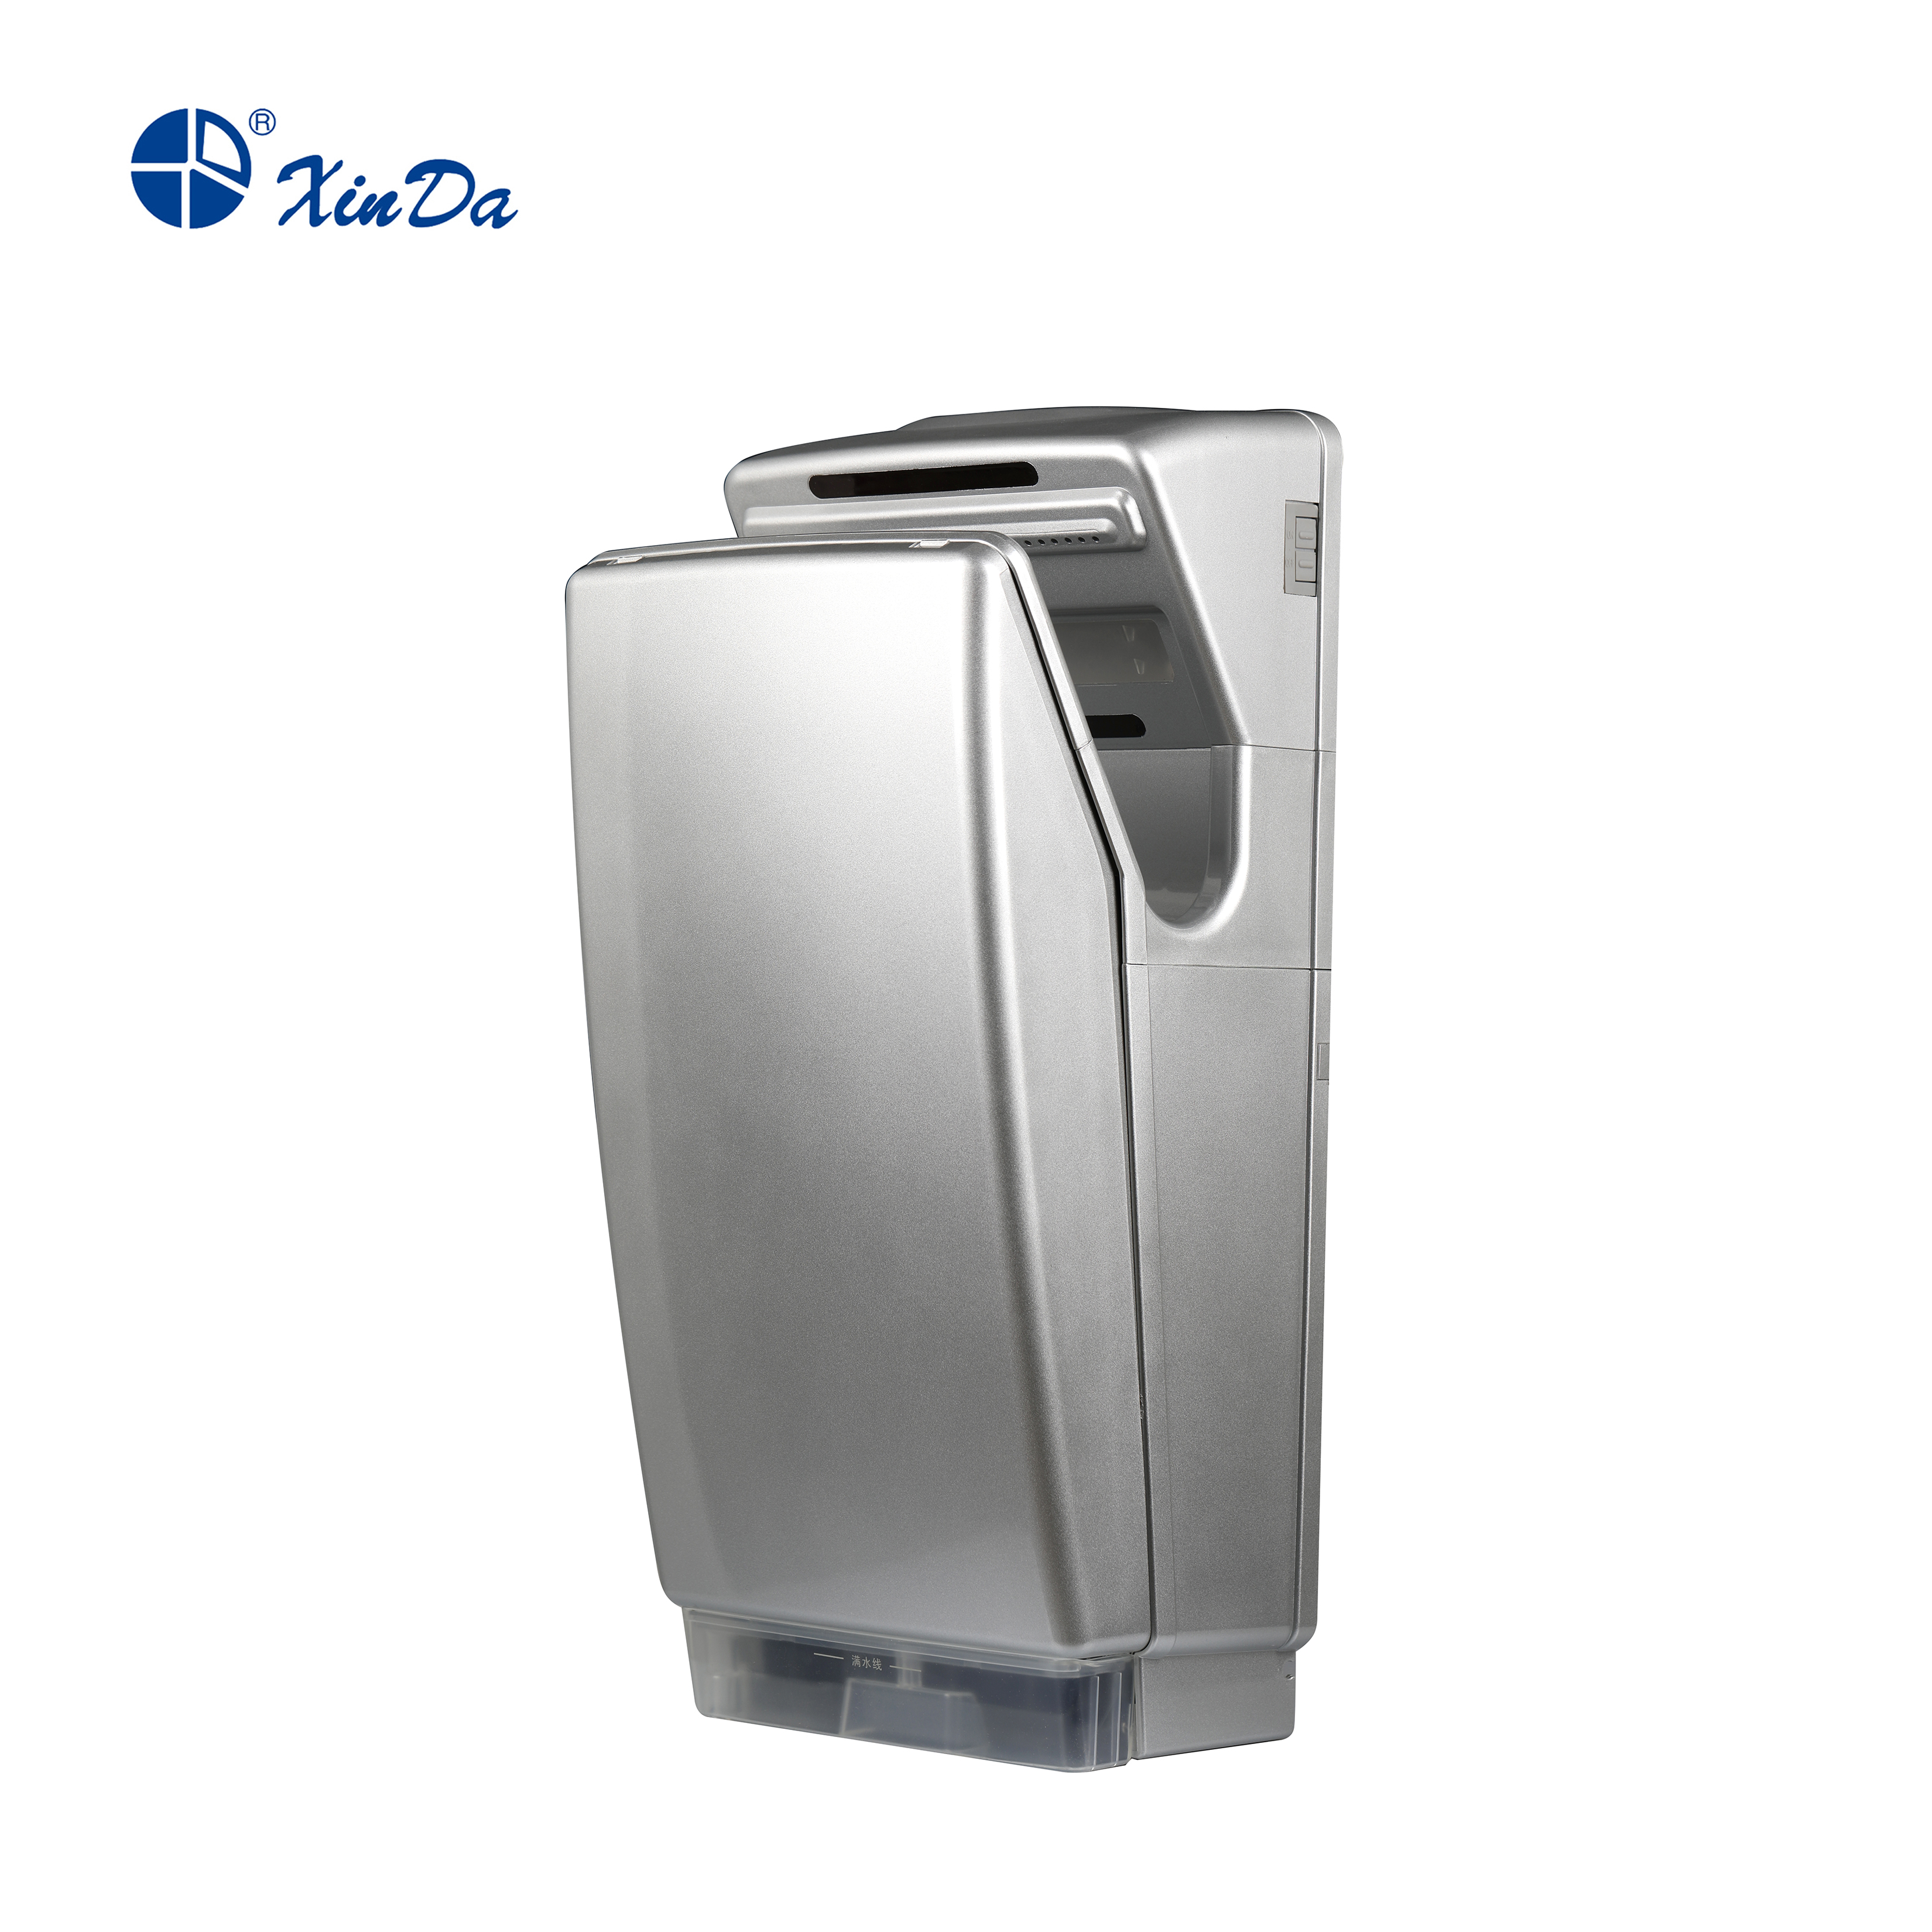 The XinDa GSQ70A Silver high speed air jet hand dryers bathroom high speed air dryers standing Hand Dryer